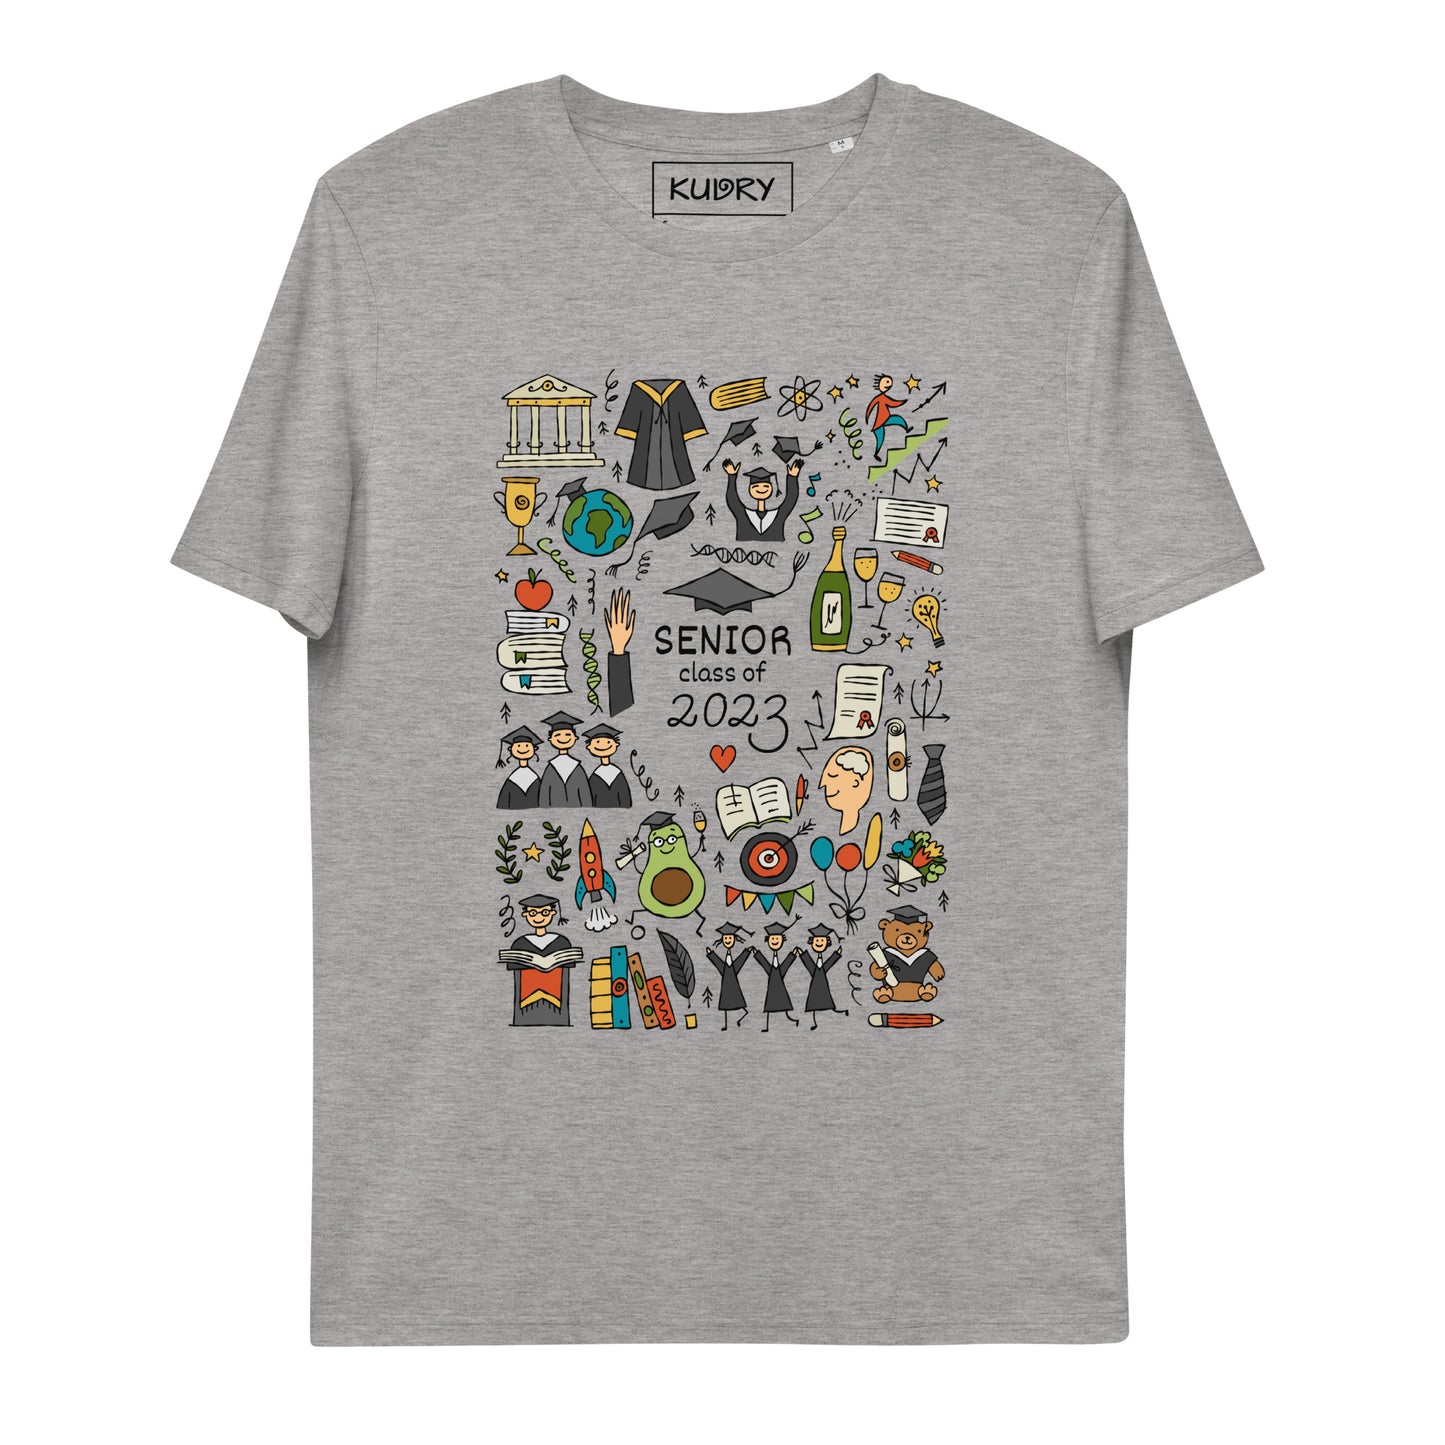 Personalised graduation 2023 grey t-shirt with funny designer print featuring graduates in hats and mantles, holiday-themed motifs, and a graduation teddy bear.